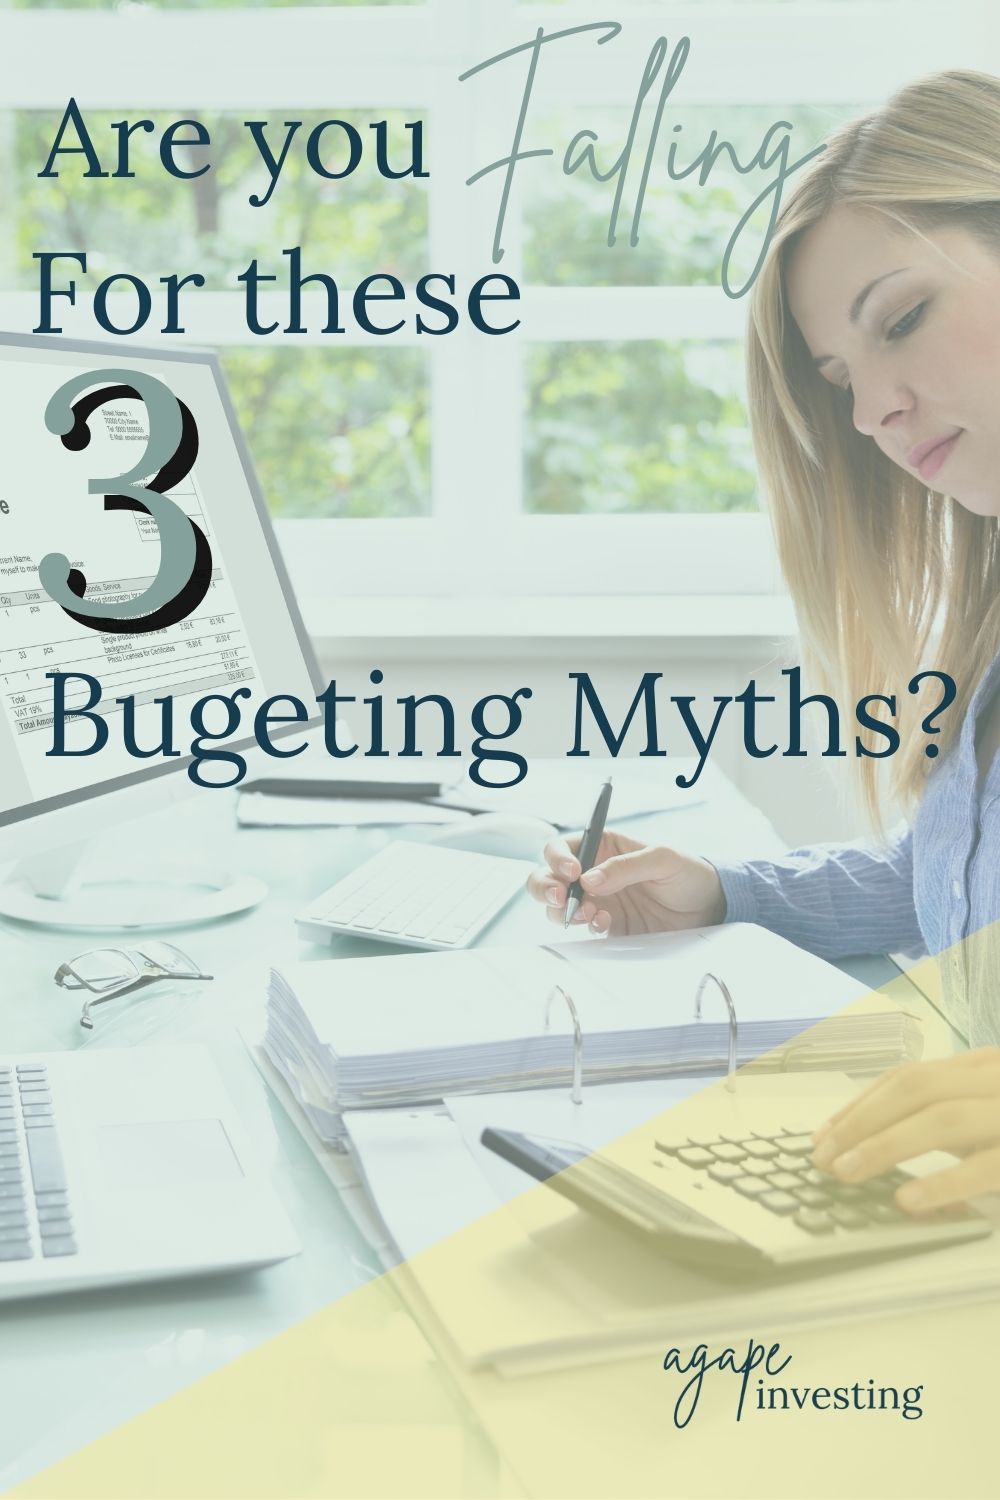 In this article we will look at 3 Budgeting Myths that could be keeping you from accomplishing the goals you have set up for yourself. Read on to see how we debunk each budgeting myth and give tips on building a budget that aligns with what matters most to you. Budgets are a great tool to help you control your money and achieve your dreams! #budgeting #budgetingtips #budgetingmyths #budgetmyths #howtobudget